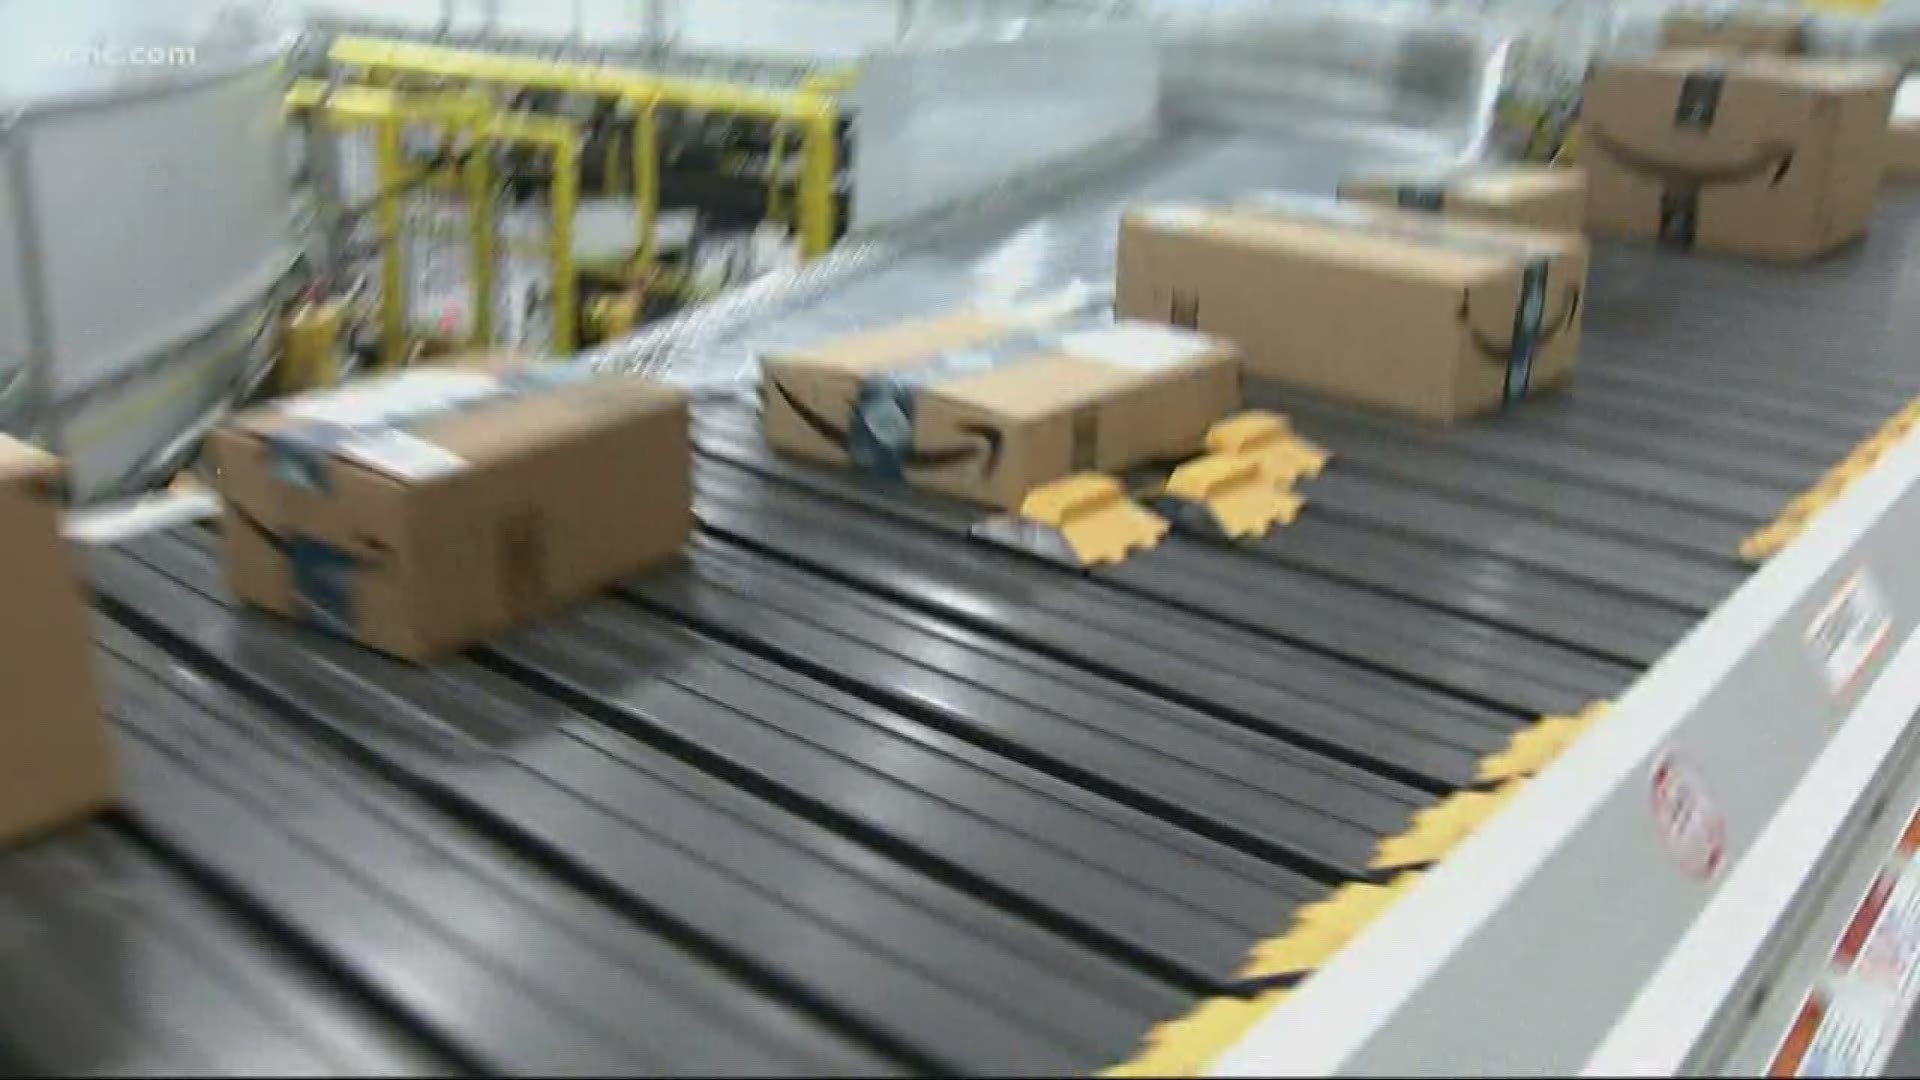 An Amazon fulfillment center using state of the art technology. It opened just in time for the busy holiday shipping season.